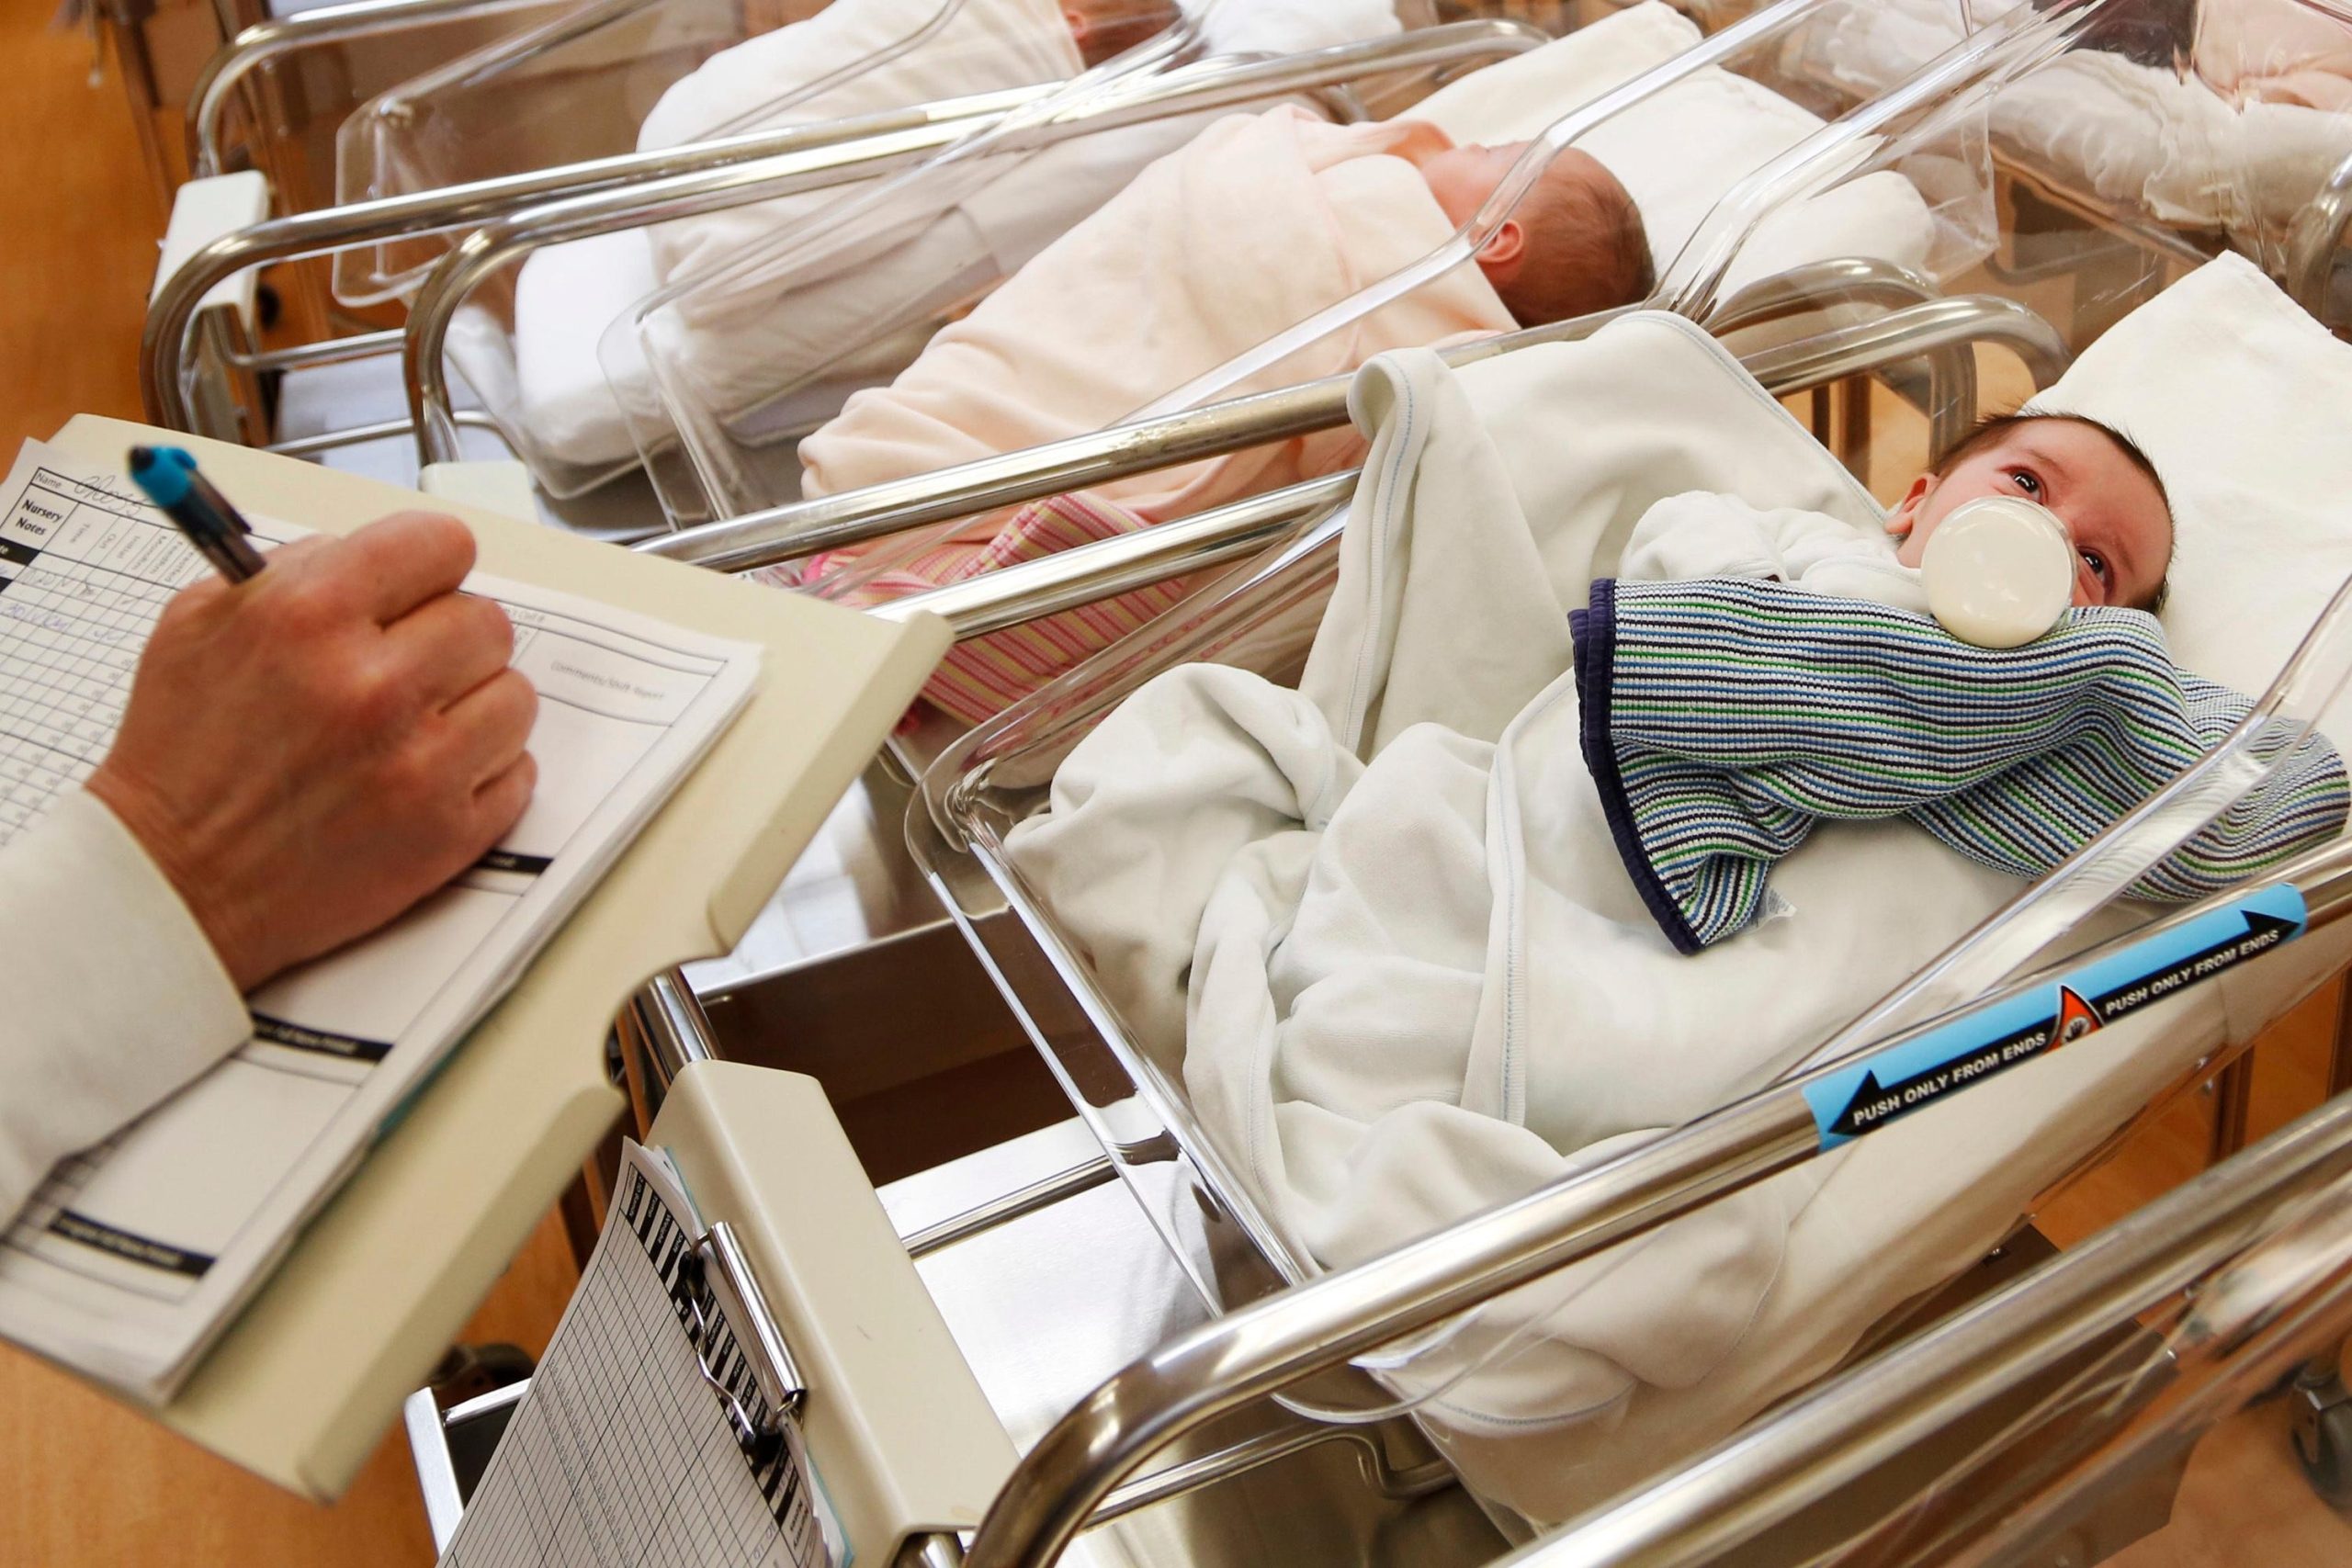 U.S. Birth Rates Continue to Fall